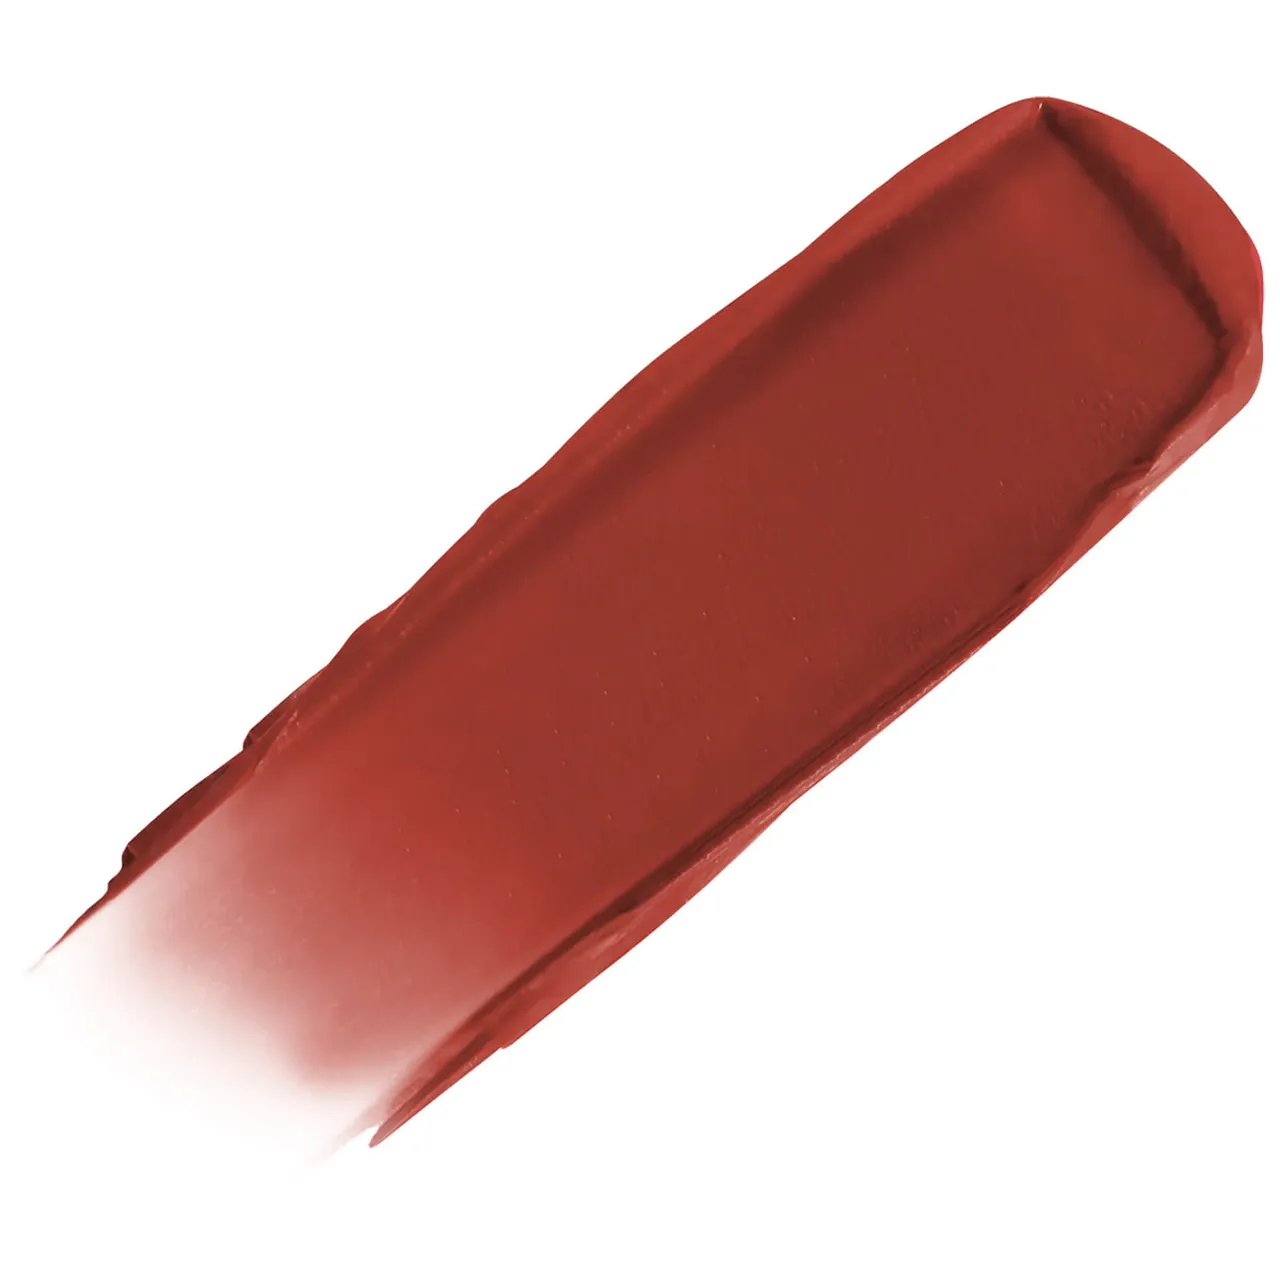 Lancôme L'Absolu Rouge Intimatte Lipstick 3.4ml (Various Shades) - 196 French Touch